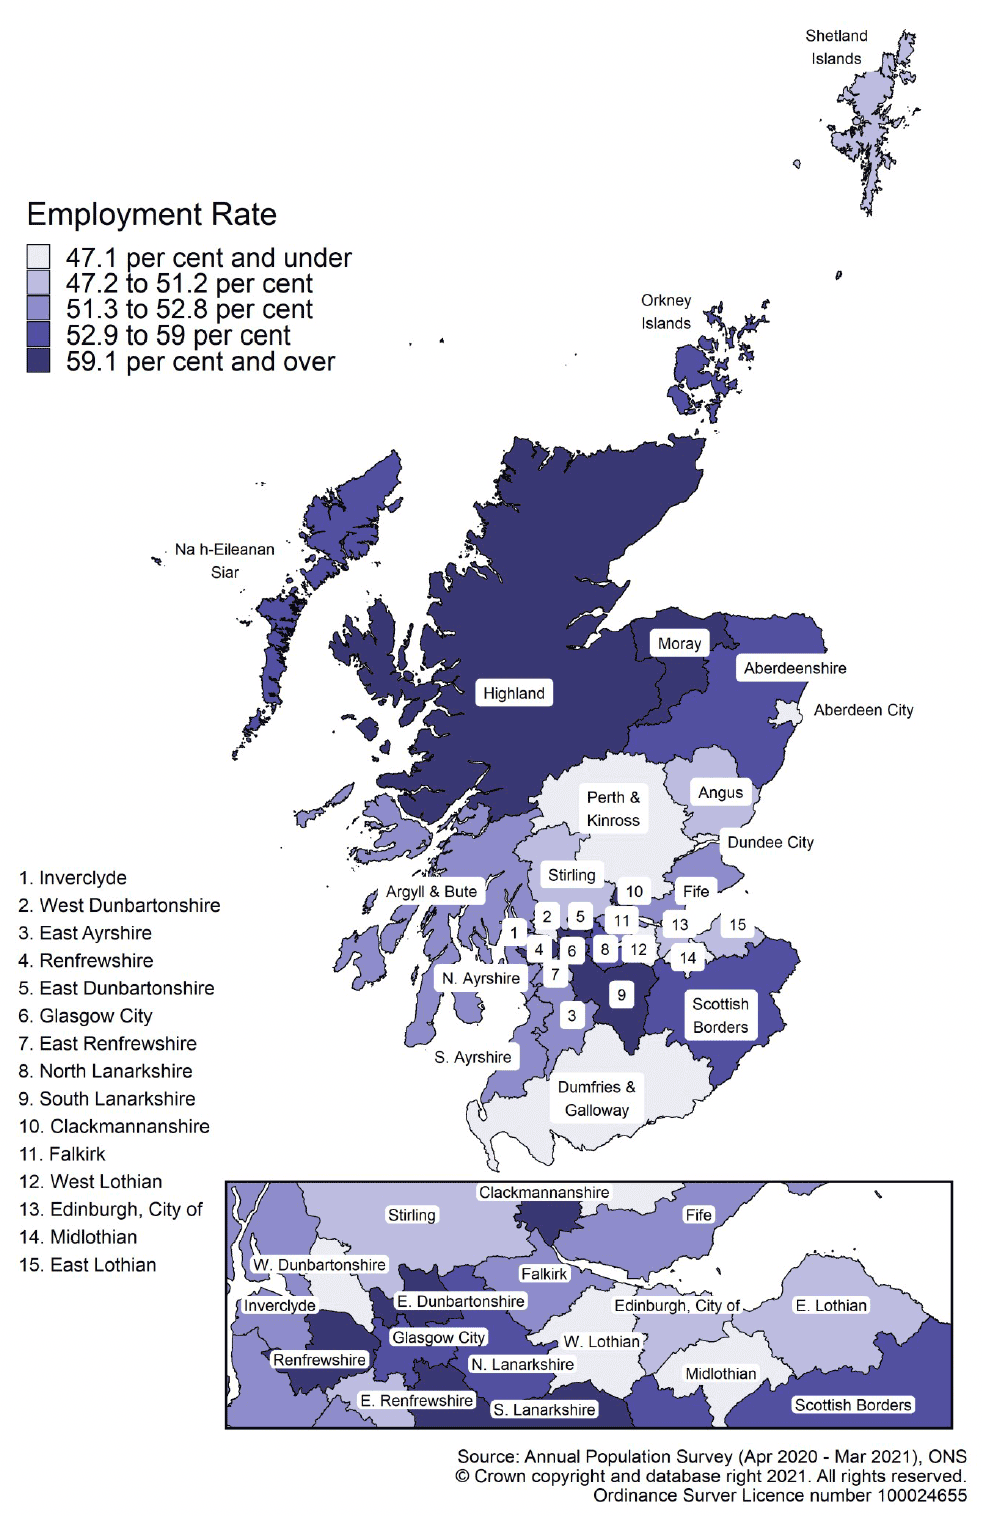 Map of Scotland showing employment rate ranges by local authority area for 16 to 24 year olds in April 2020-March 2021